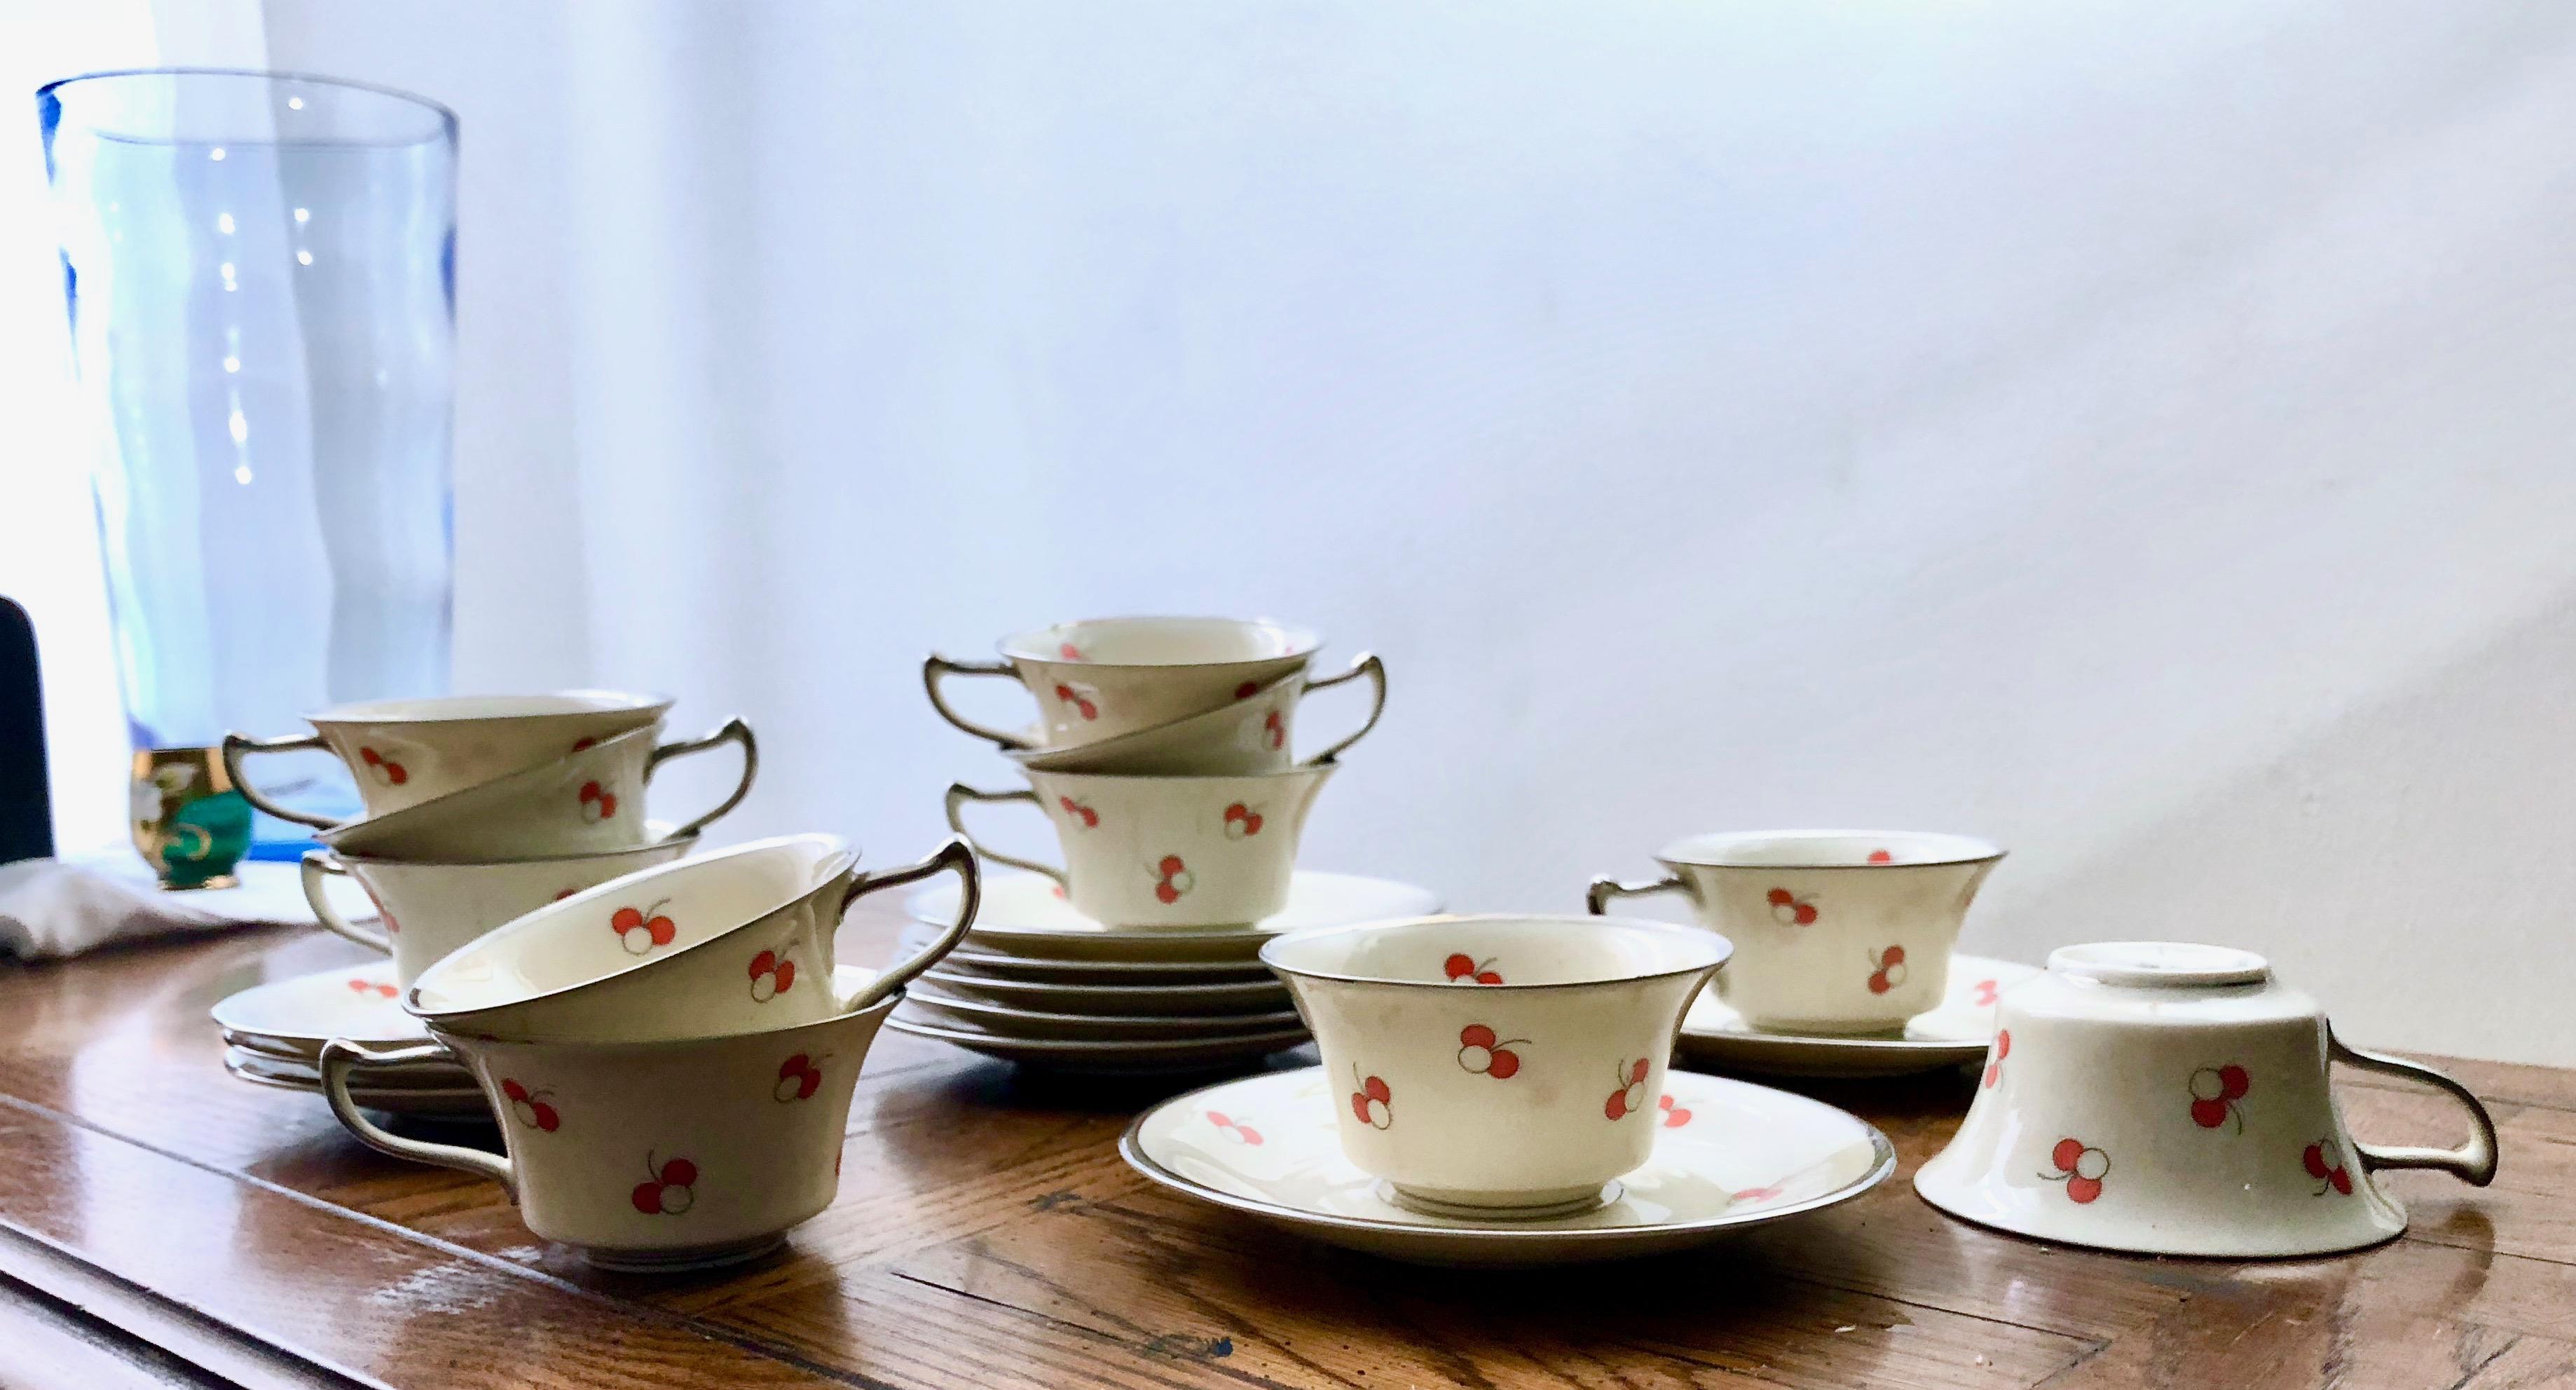 Rosenthal Pre-WWII ‘Cherries’ Dematisse Set Porcelain Antique Silver Red Germany im Zustand „Relativ gut“ in Brooklyn, NY